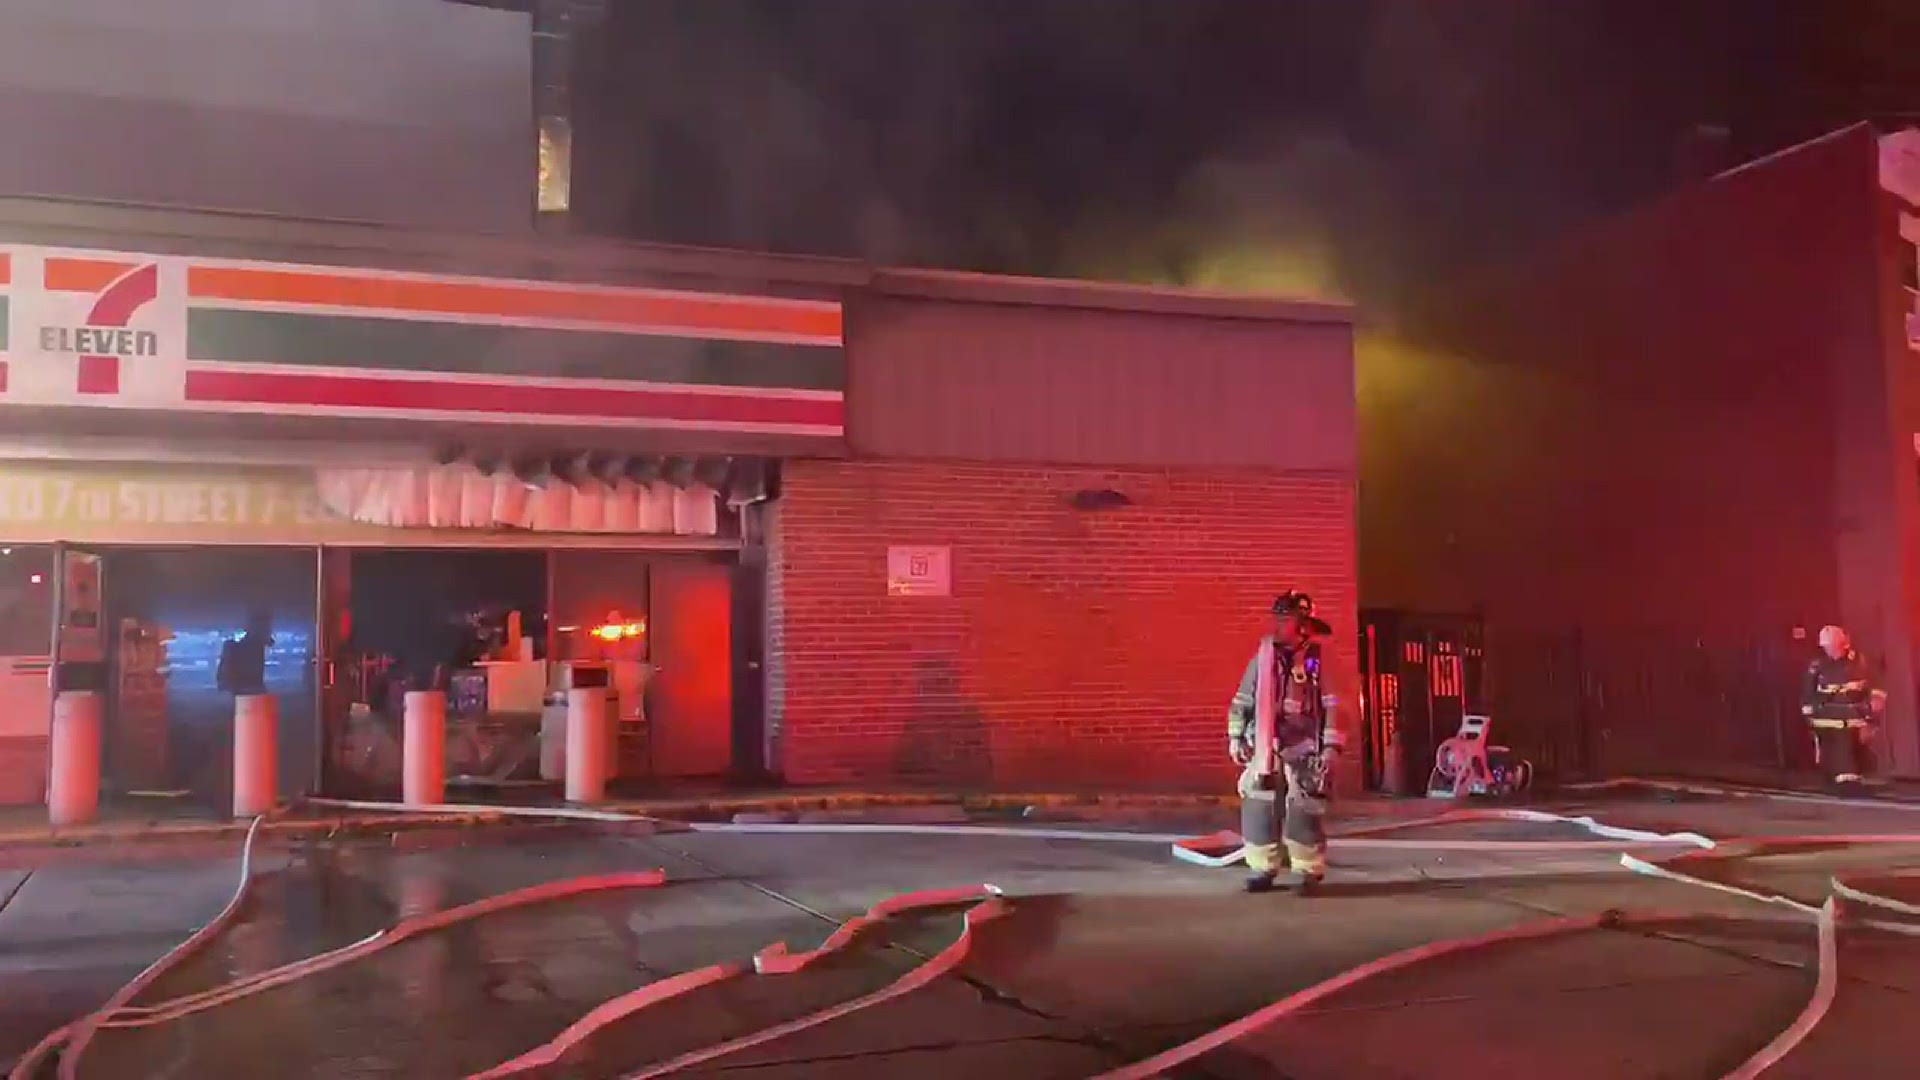 DC firefighters were called to fight a fire early Wednesday at a 7-Eleven store in Northwest.